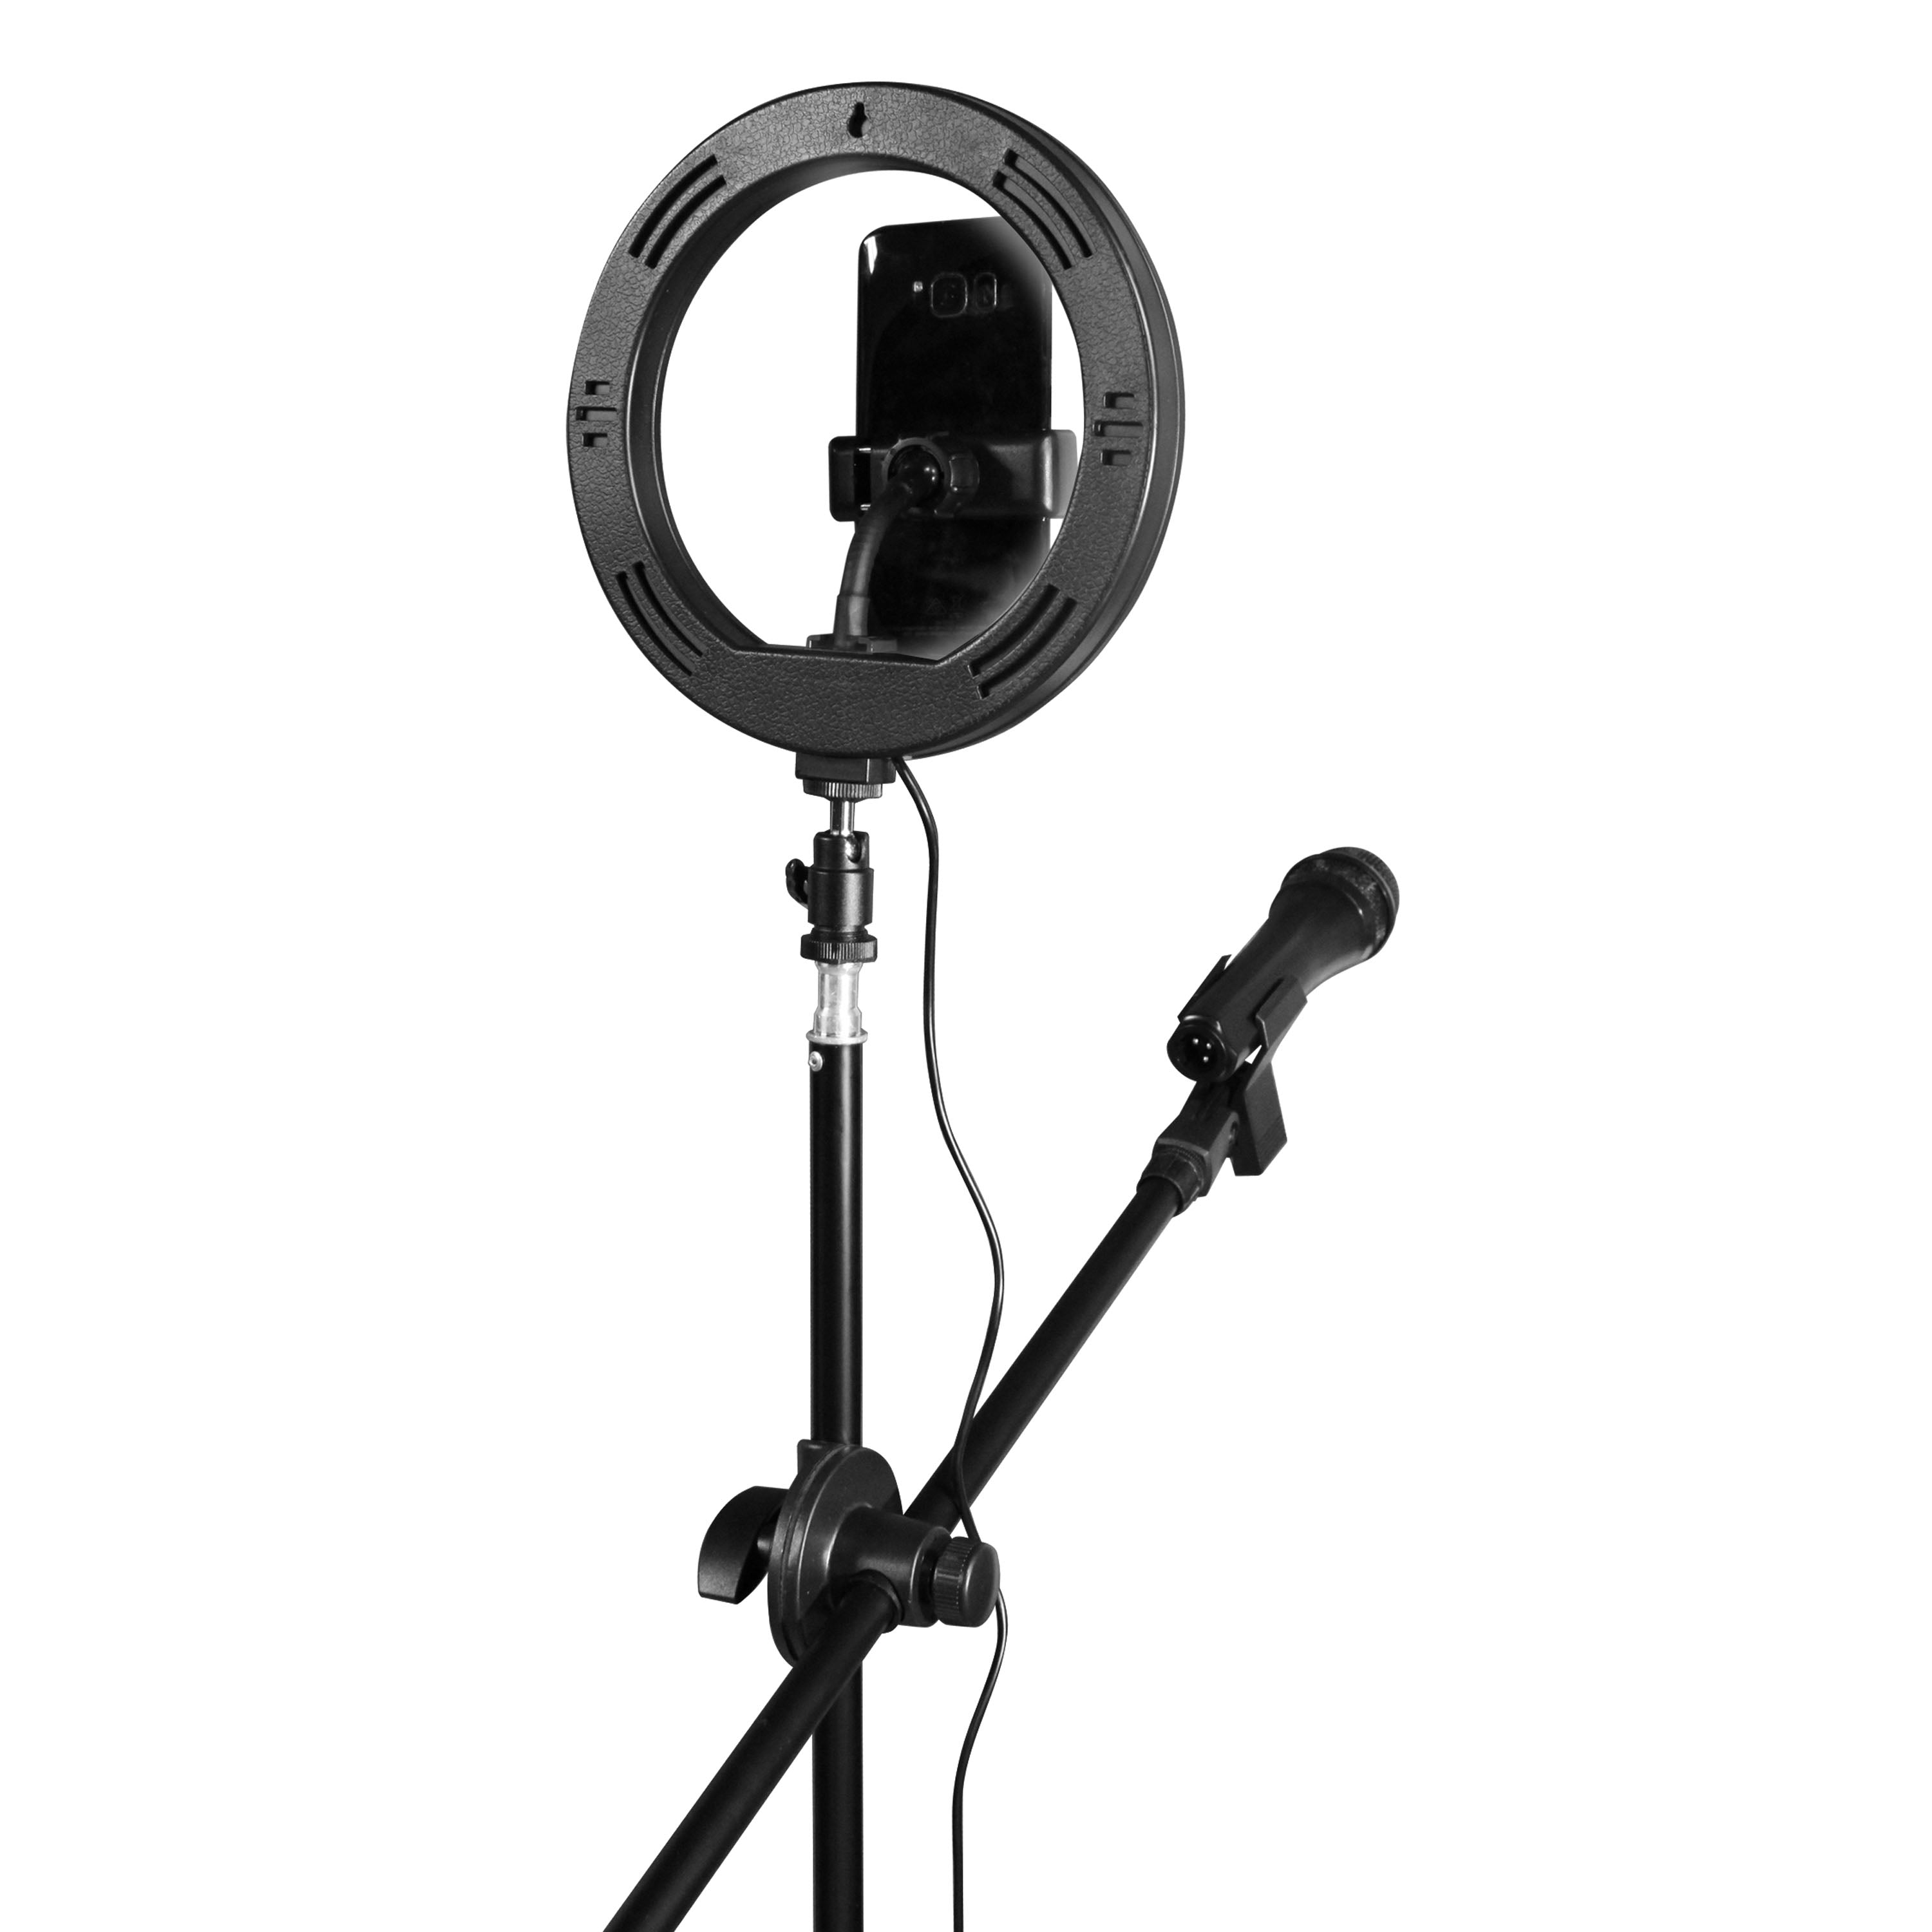 8 Inch Ring Light Studio Kit with Light, Tripod, Mic and Phone Mounts